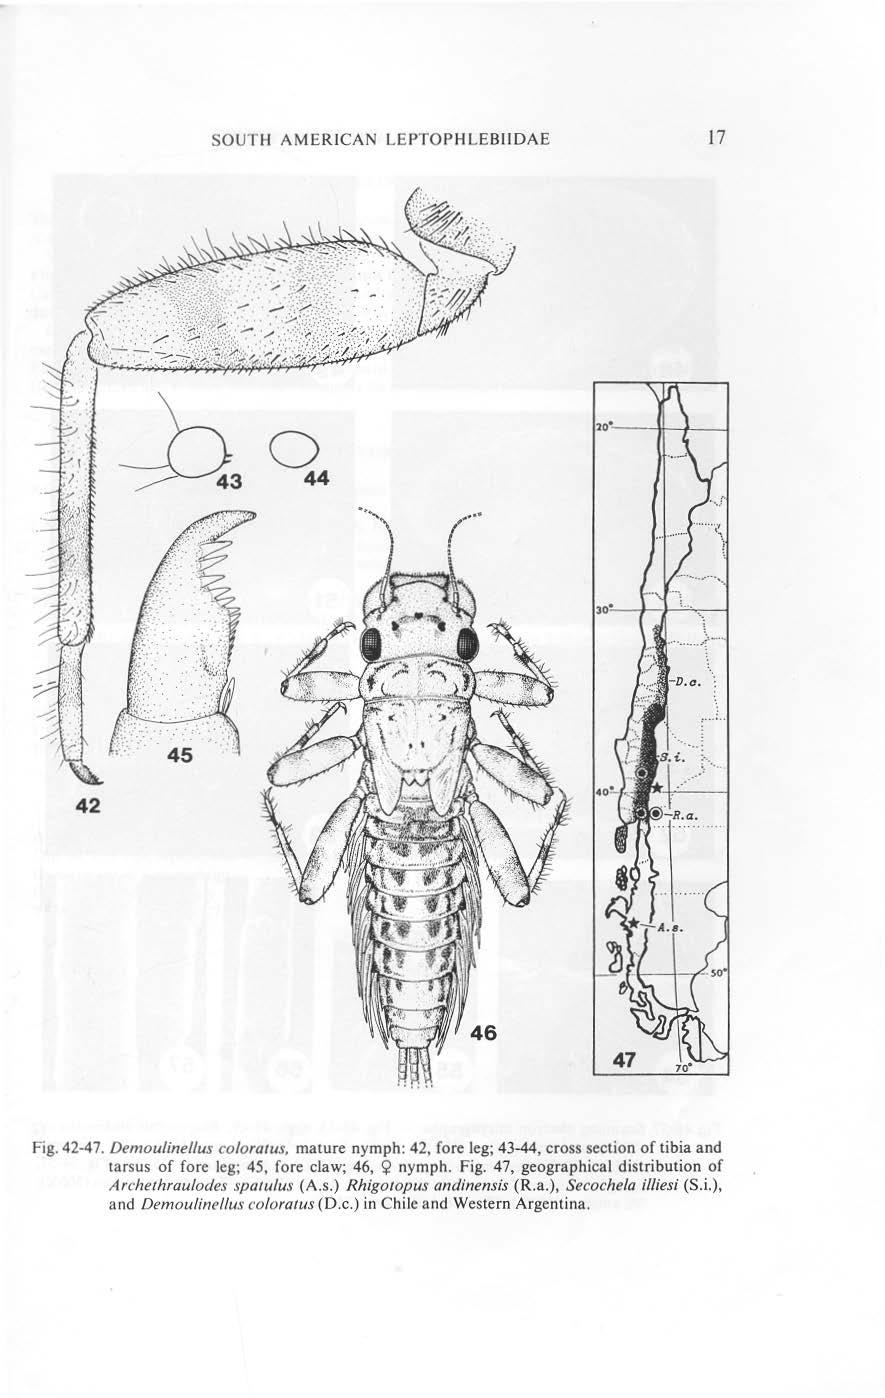 SOUTH AMERICAN LEPTOPHLEBllDAE 17 0 44 42 Fig. 42-47. Demoulinellus coloratus, mature nymph: 42, fore leg; 43-44, cross section of tibia and tarsus of fore leg; 45, fore claw; 46, ~ nymph.